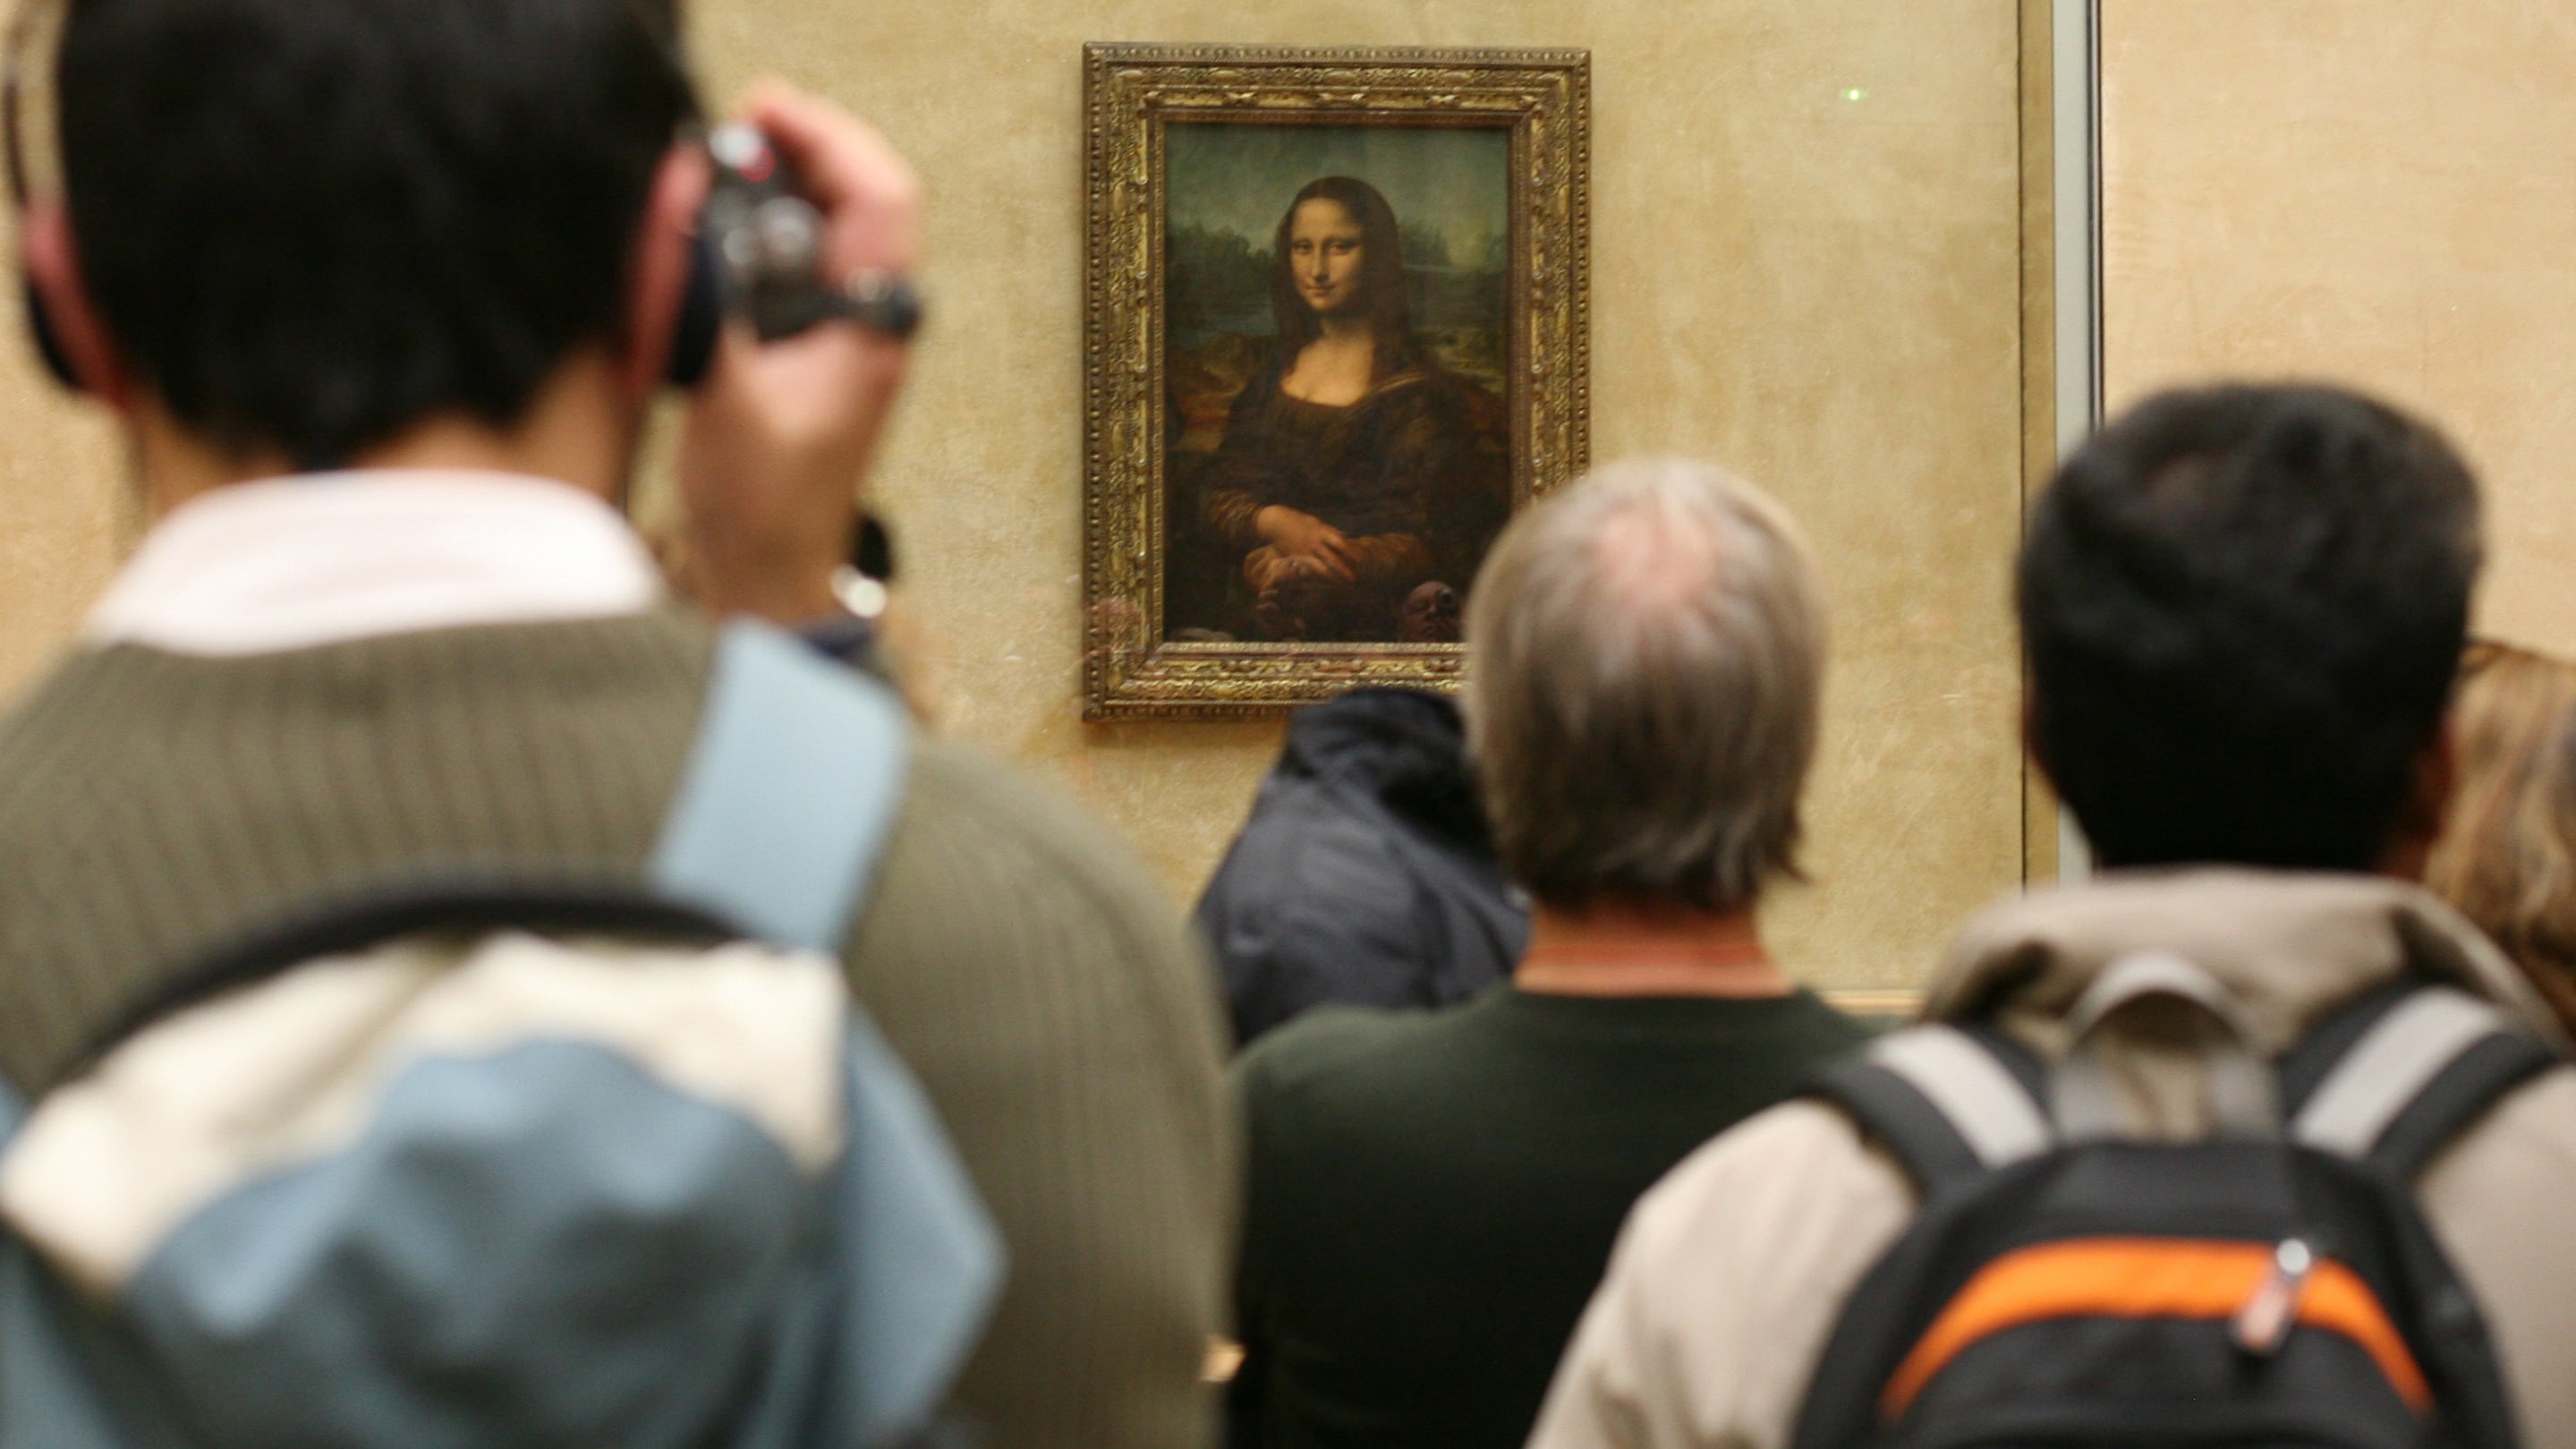 The Mona Lisa in The Louvre in Paris